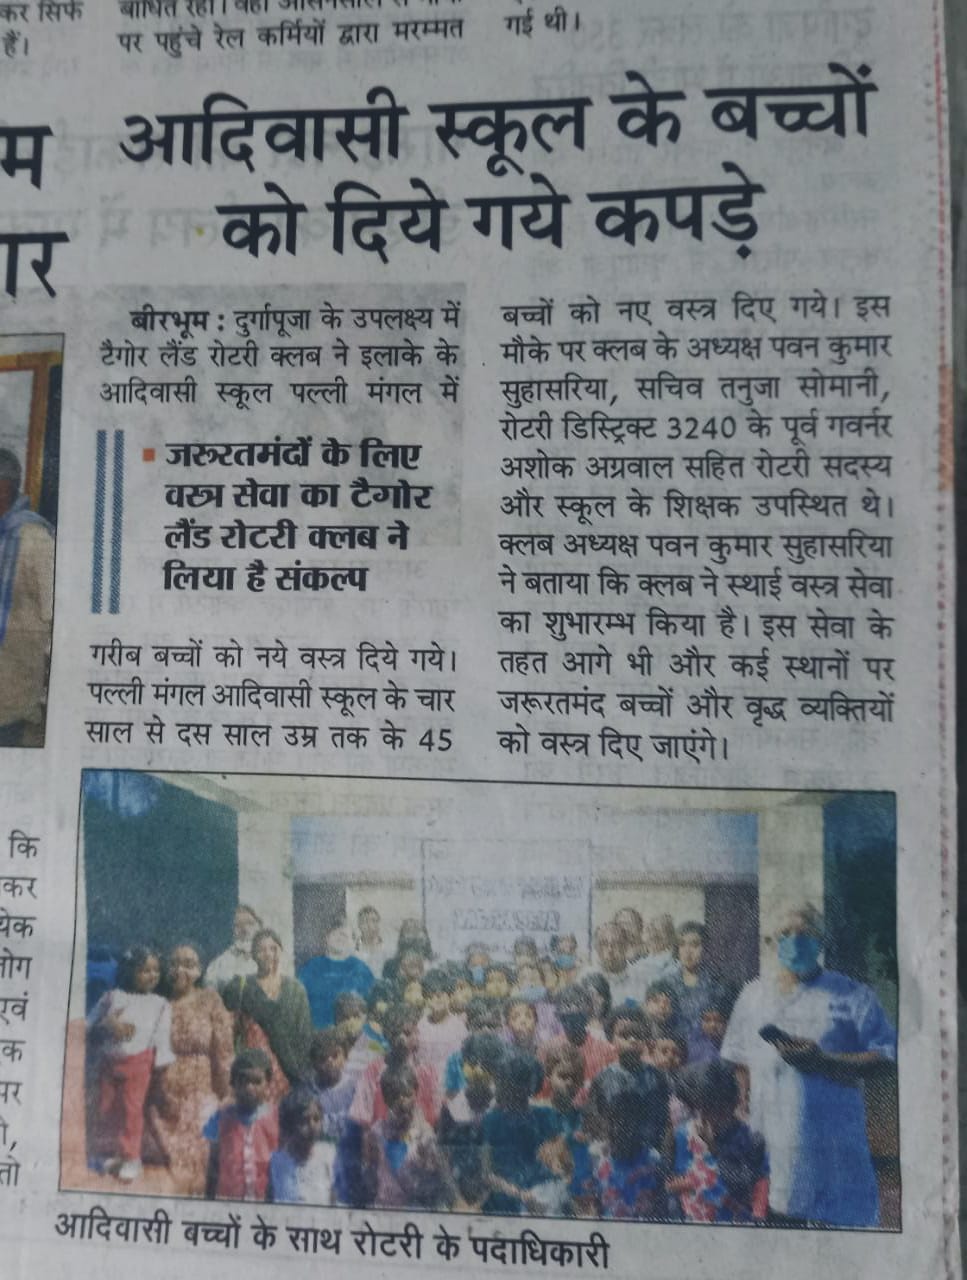 Reporting of our Vastra Seva: Spreading smiles in a Hindi daily newspaper ” Sanmarg”.